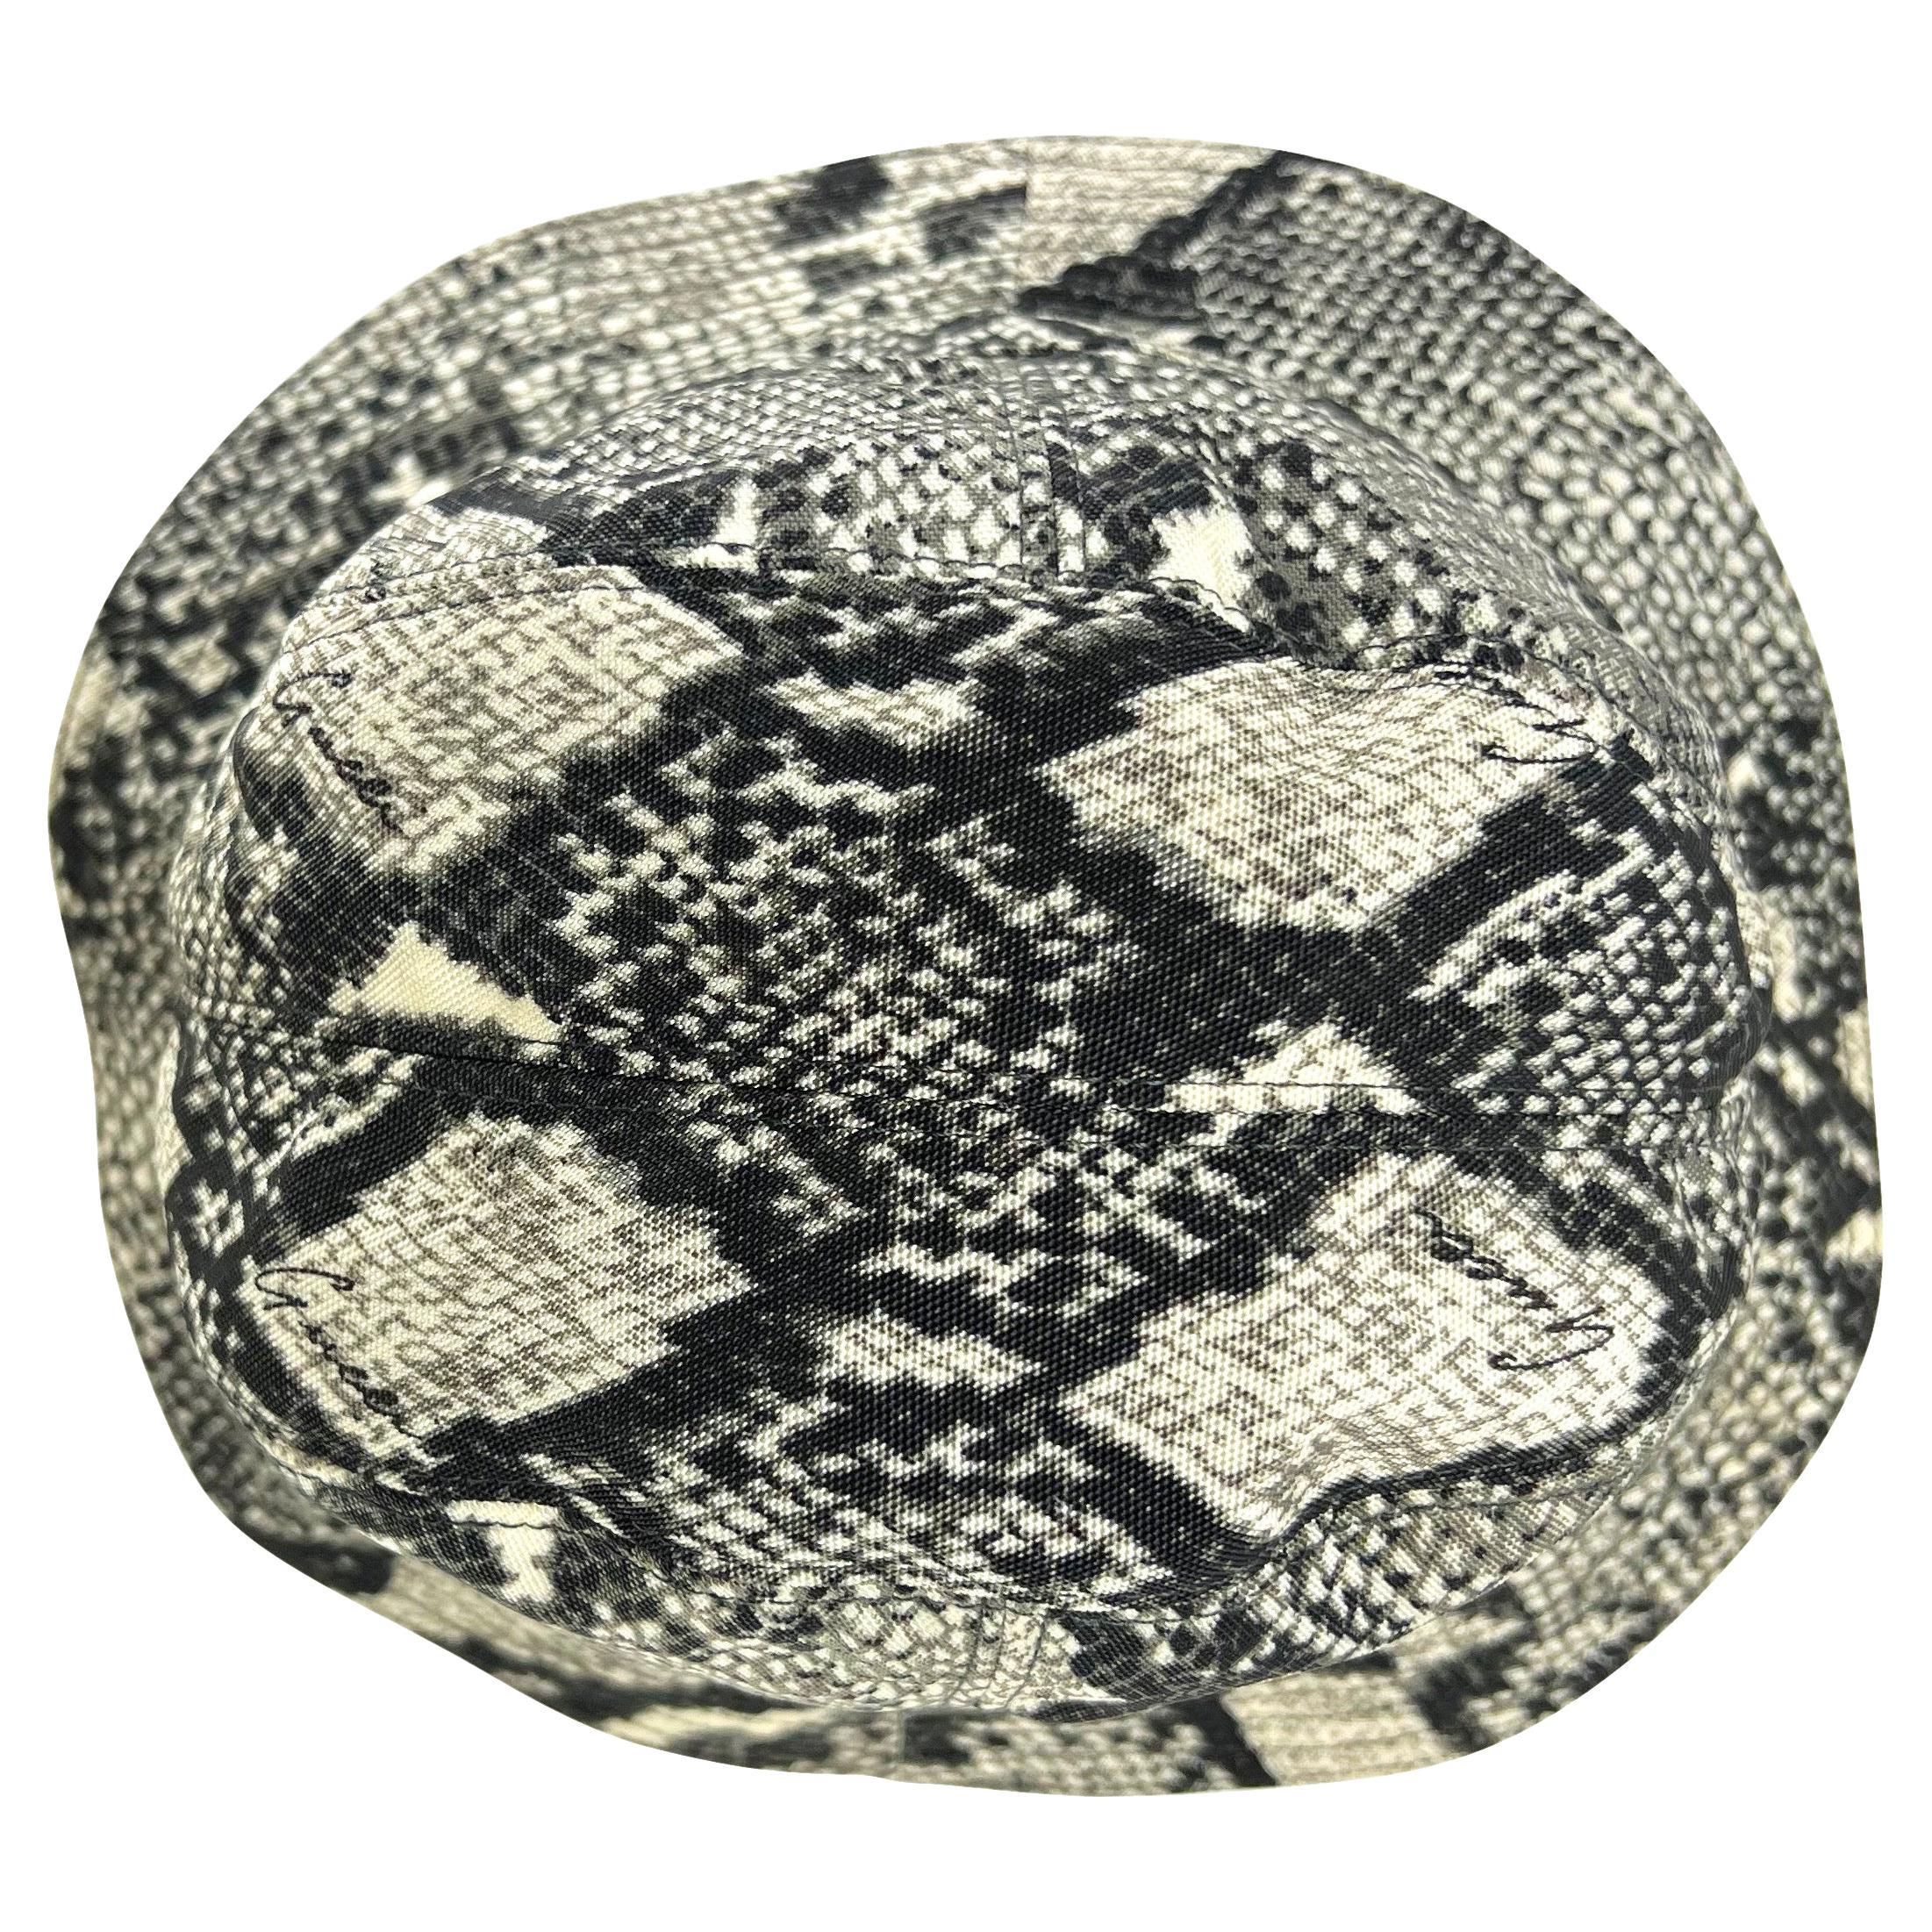 S/S 2000 Gucci by Tom Ford Snakeskin Print Grey Nylon Bucket Hat For Sale 1